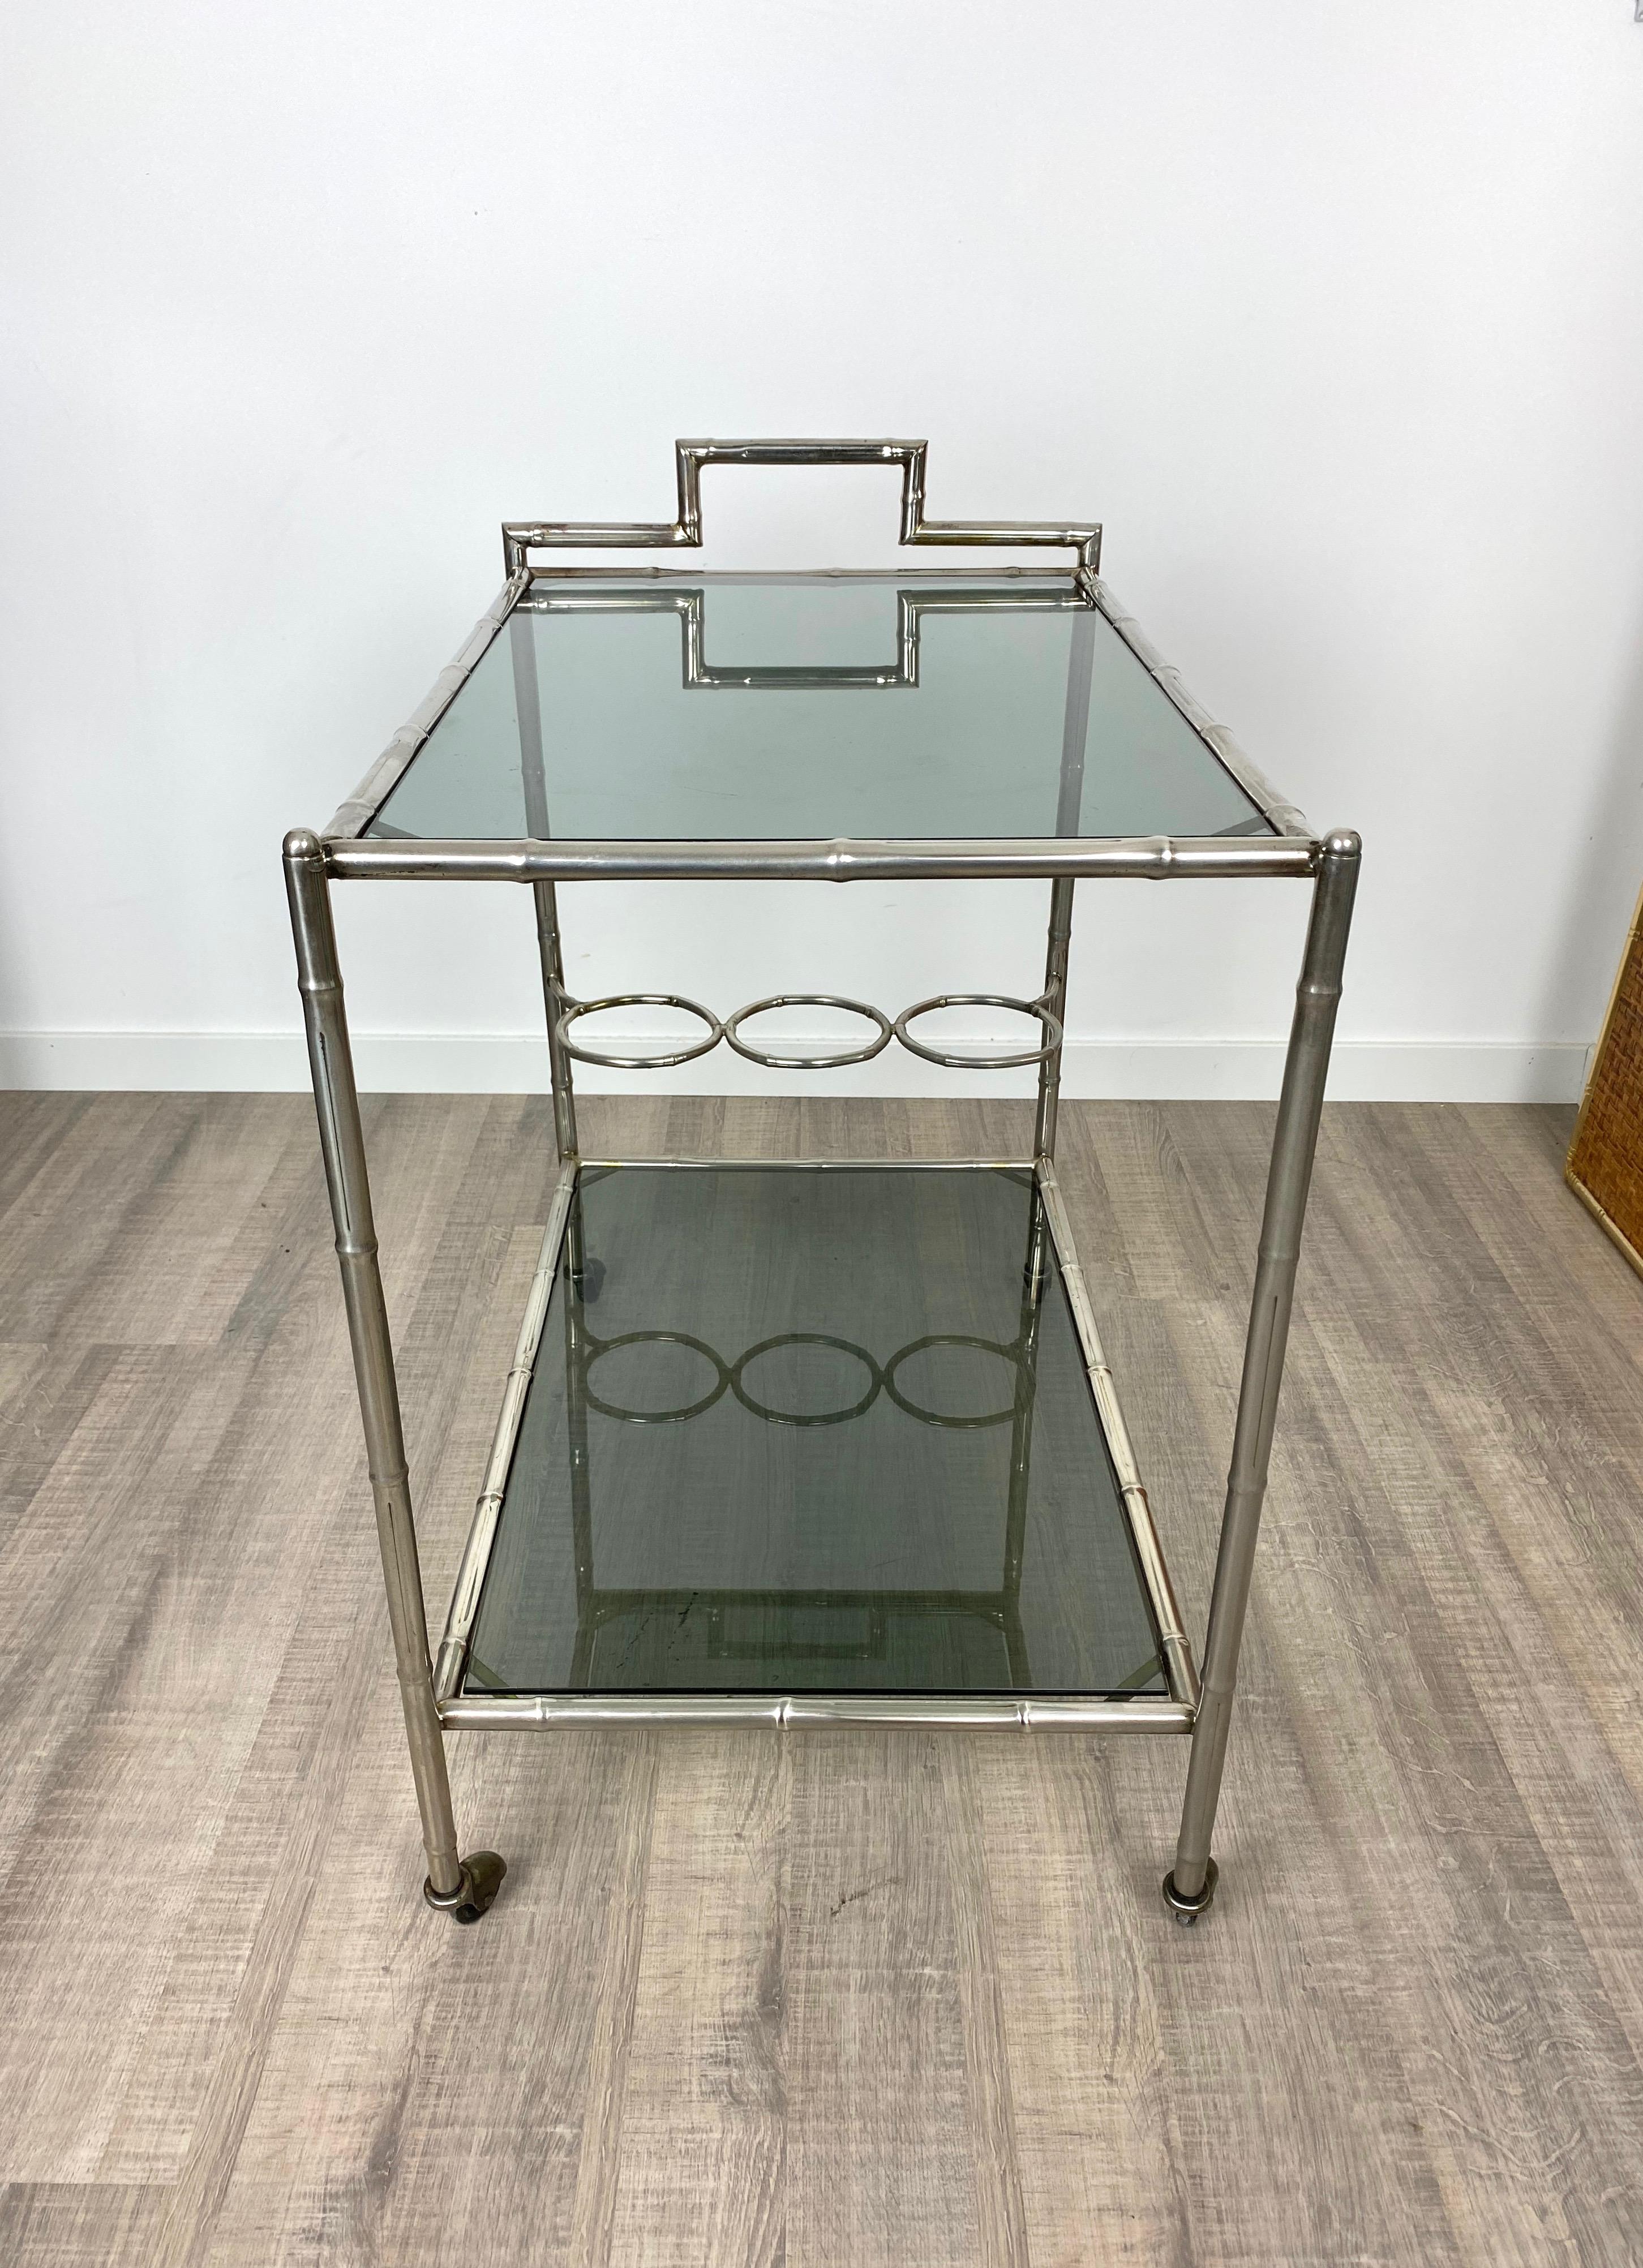 Faux Bamboo Silver and Glass Cart Trolley, Italy, 1970s For Sale 4